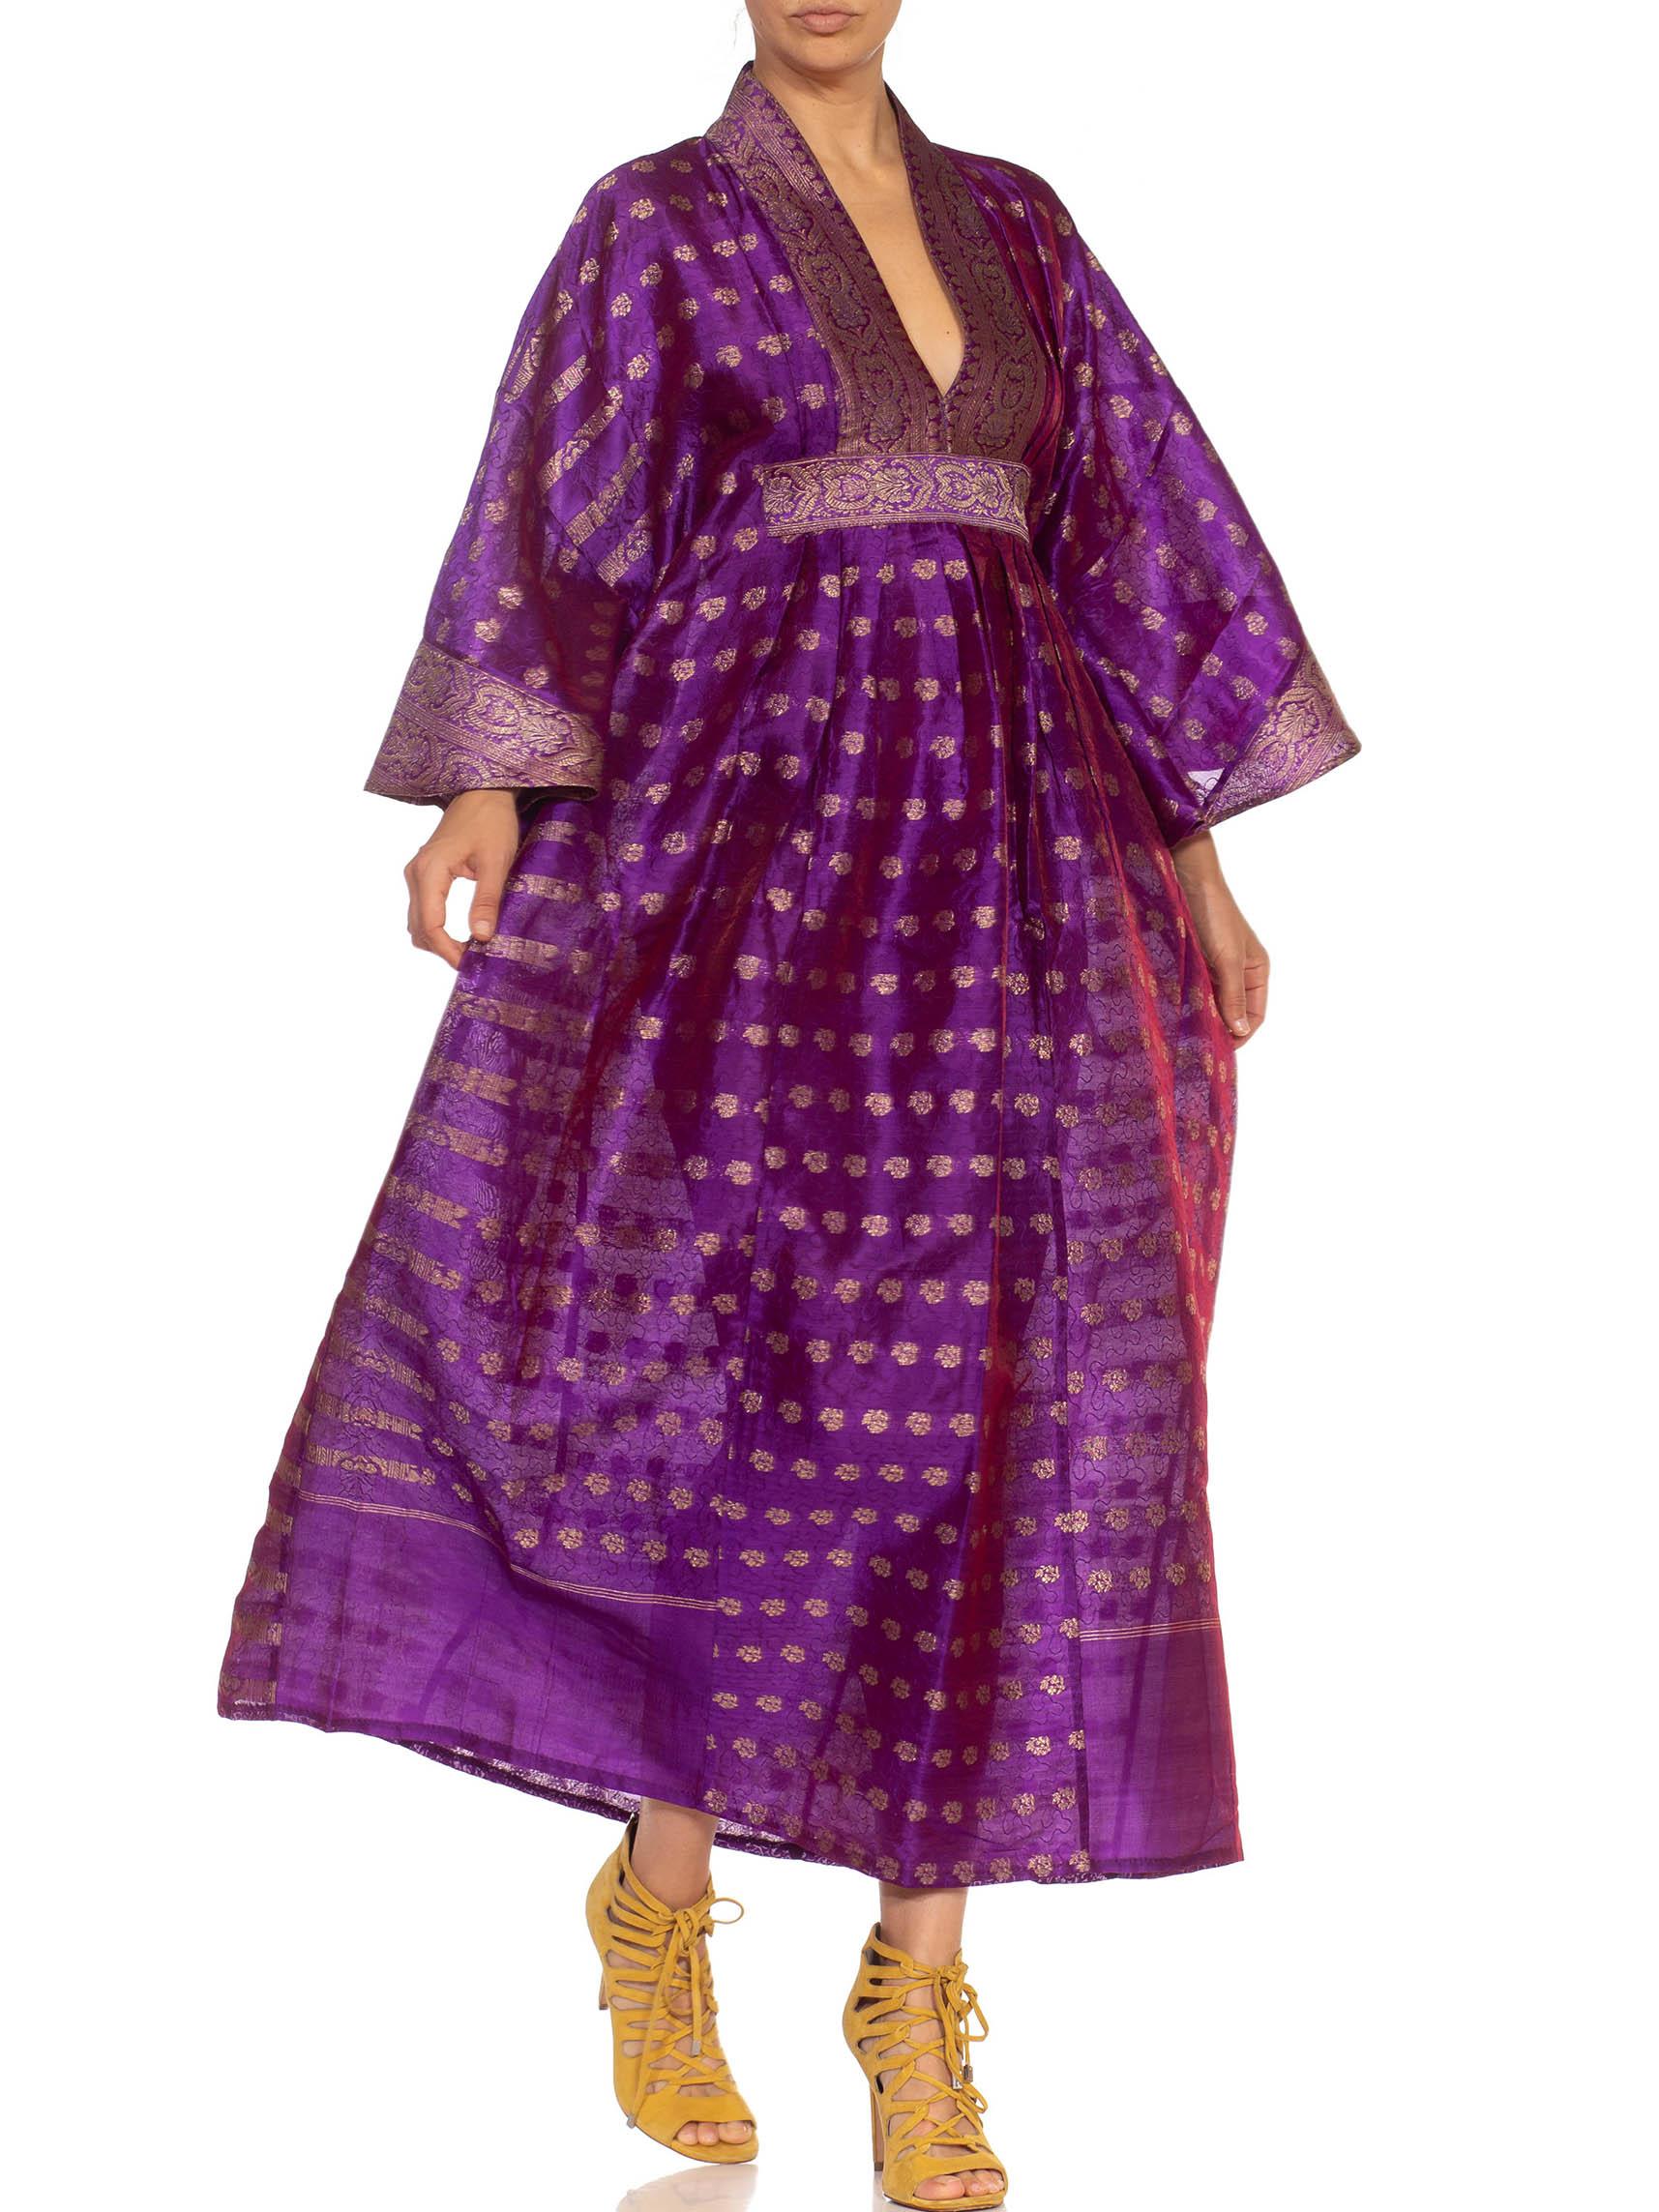 MORPHEW COLLECTION Purple & Gold Silk Kaftan Made From Vintage Saris For Sale 5